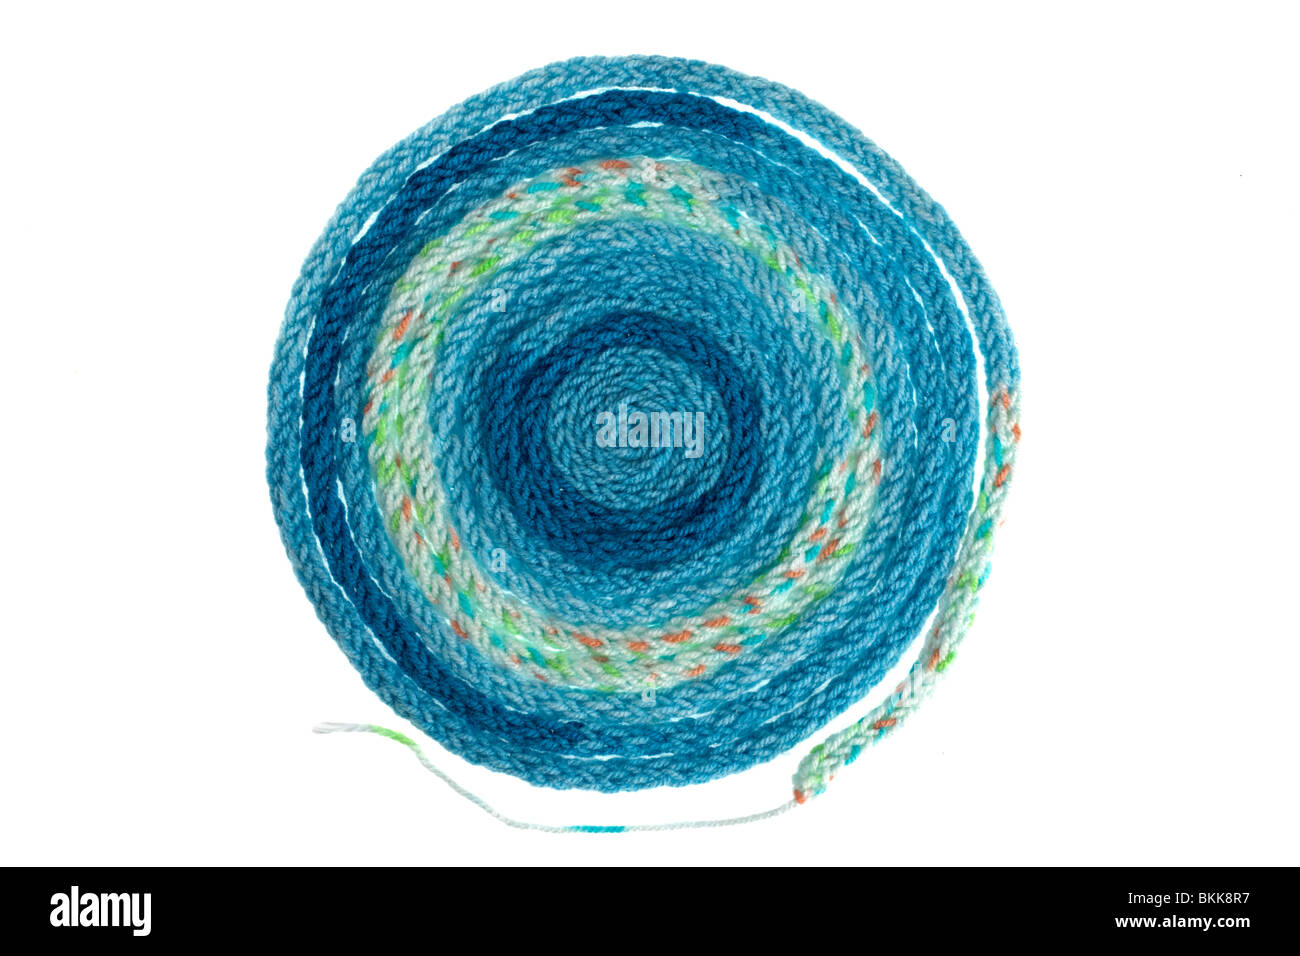 Long coiled thin circular piece of knitted blue wool Stock Photo